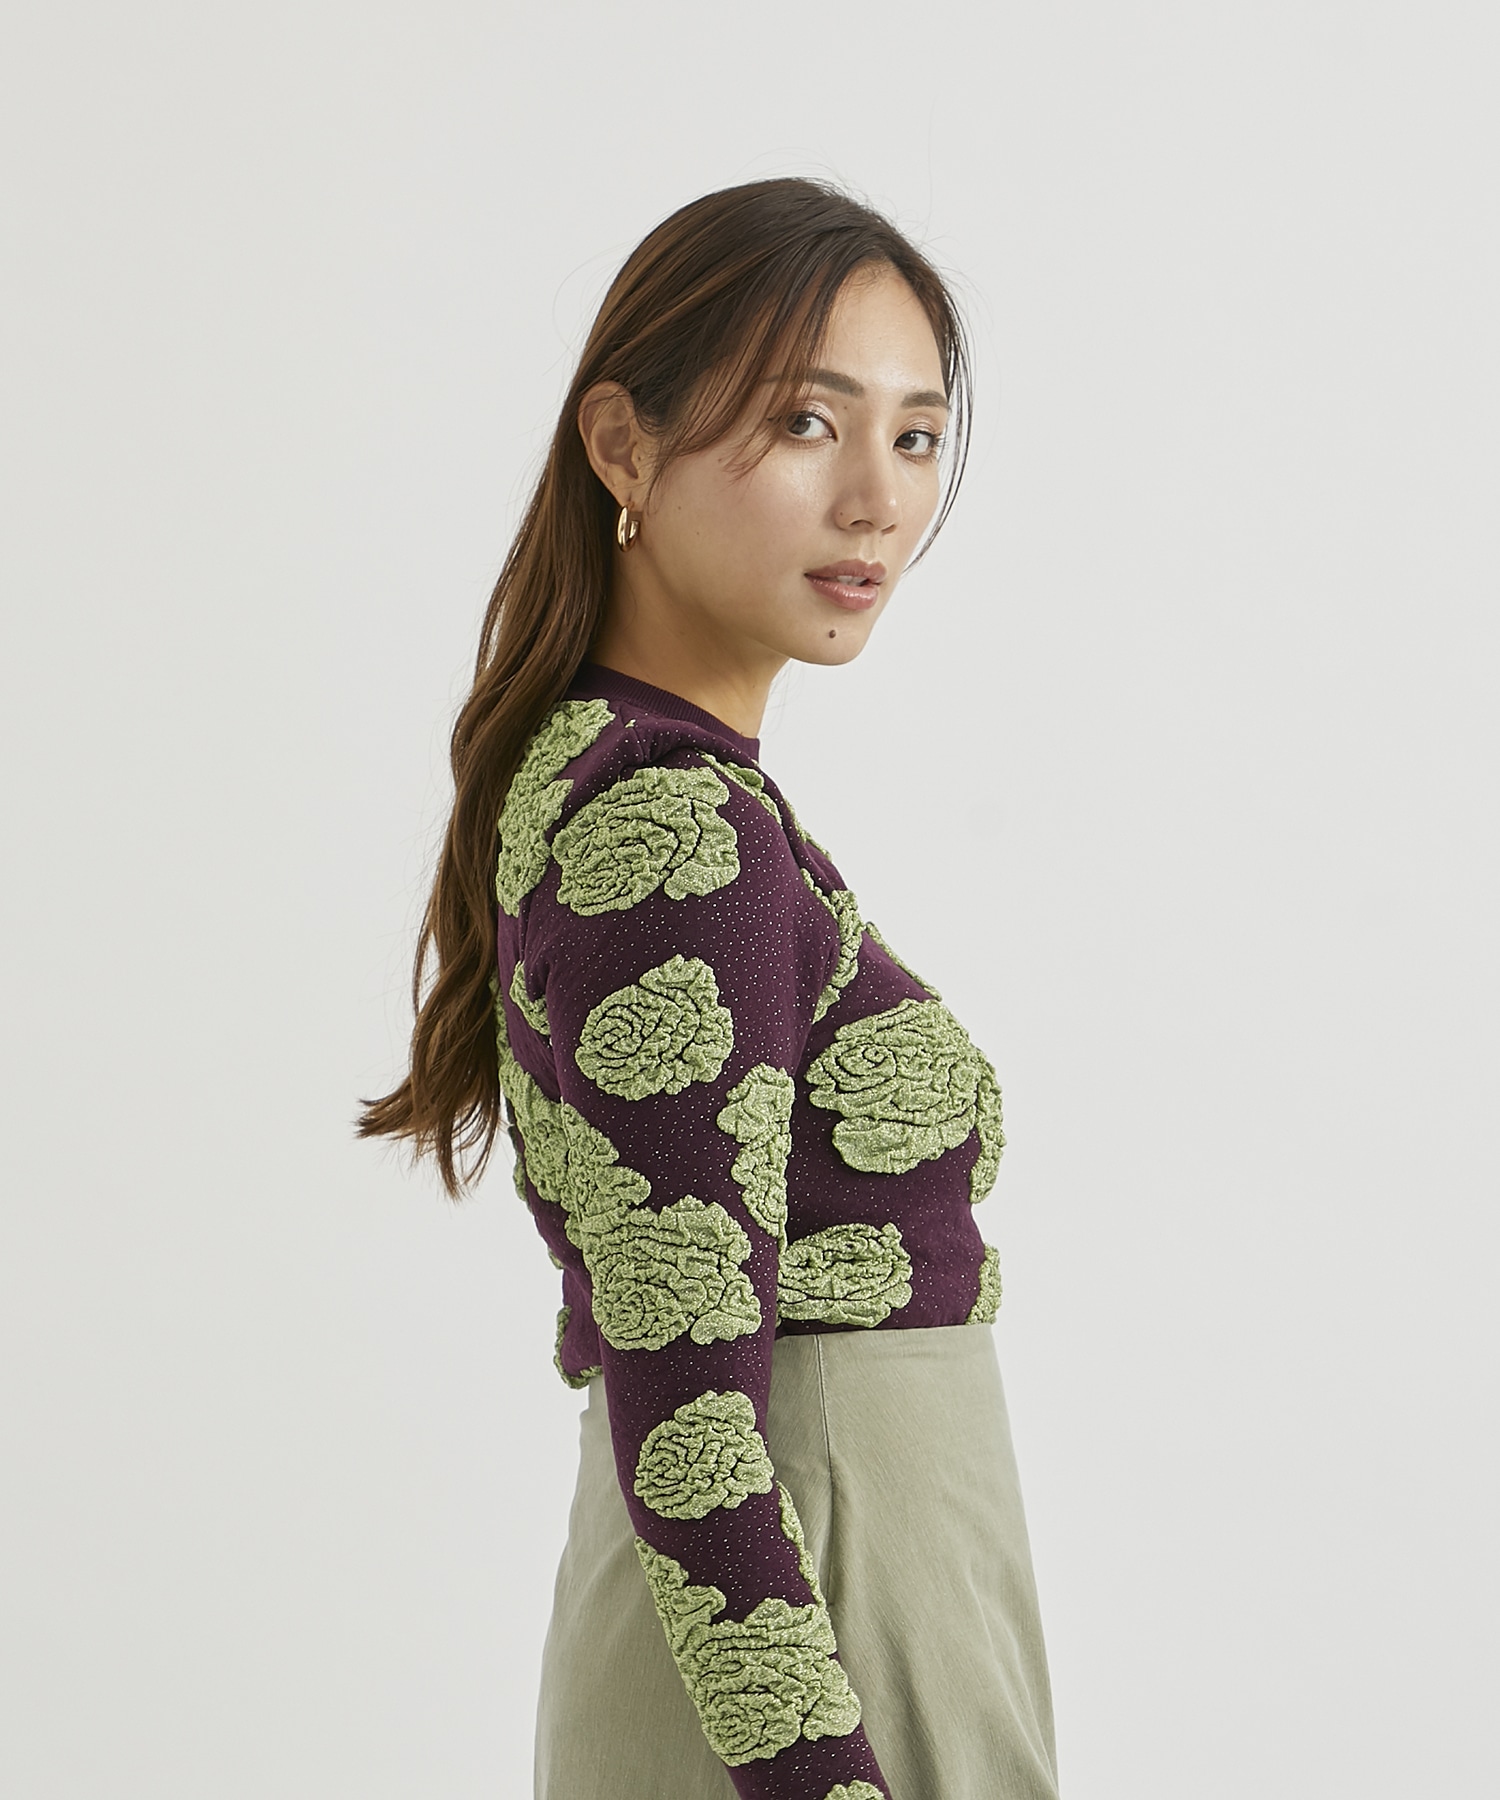 Lame jacquard knit top(36 RED): TOGA: WOMEN｜THE TOKYO ONLINE STORE